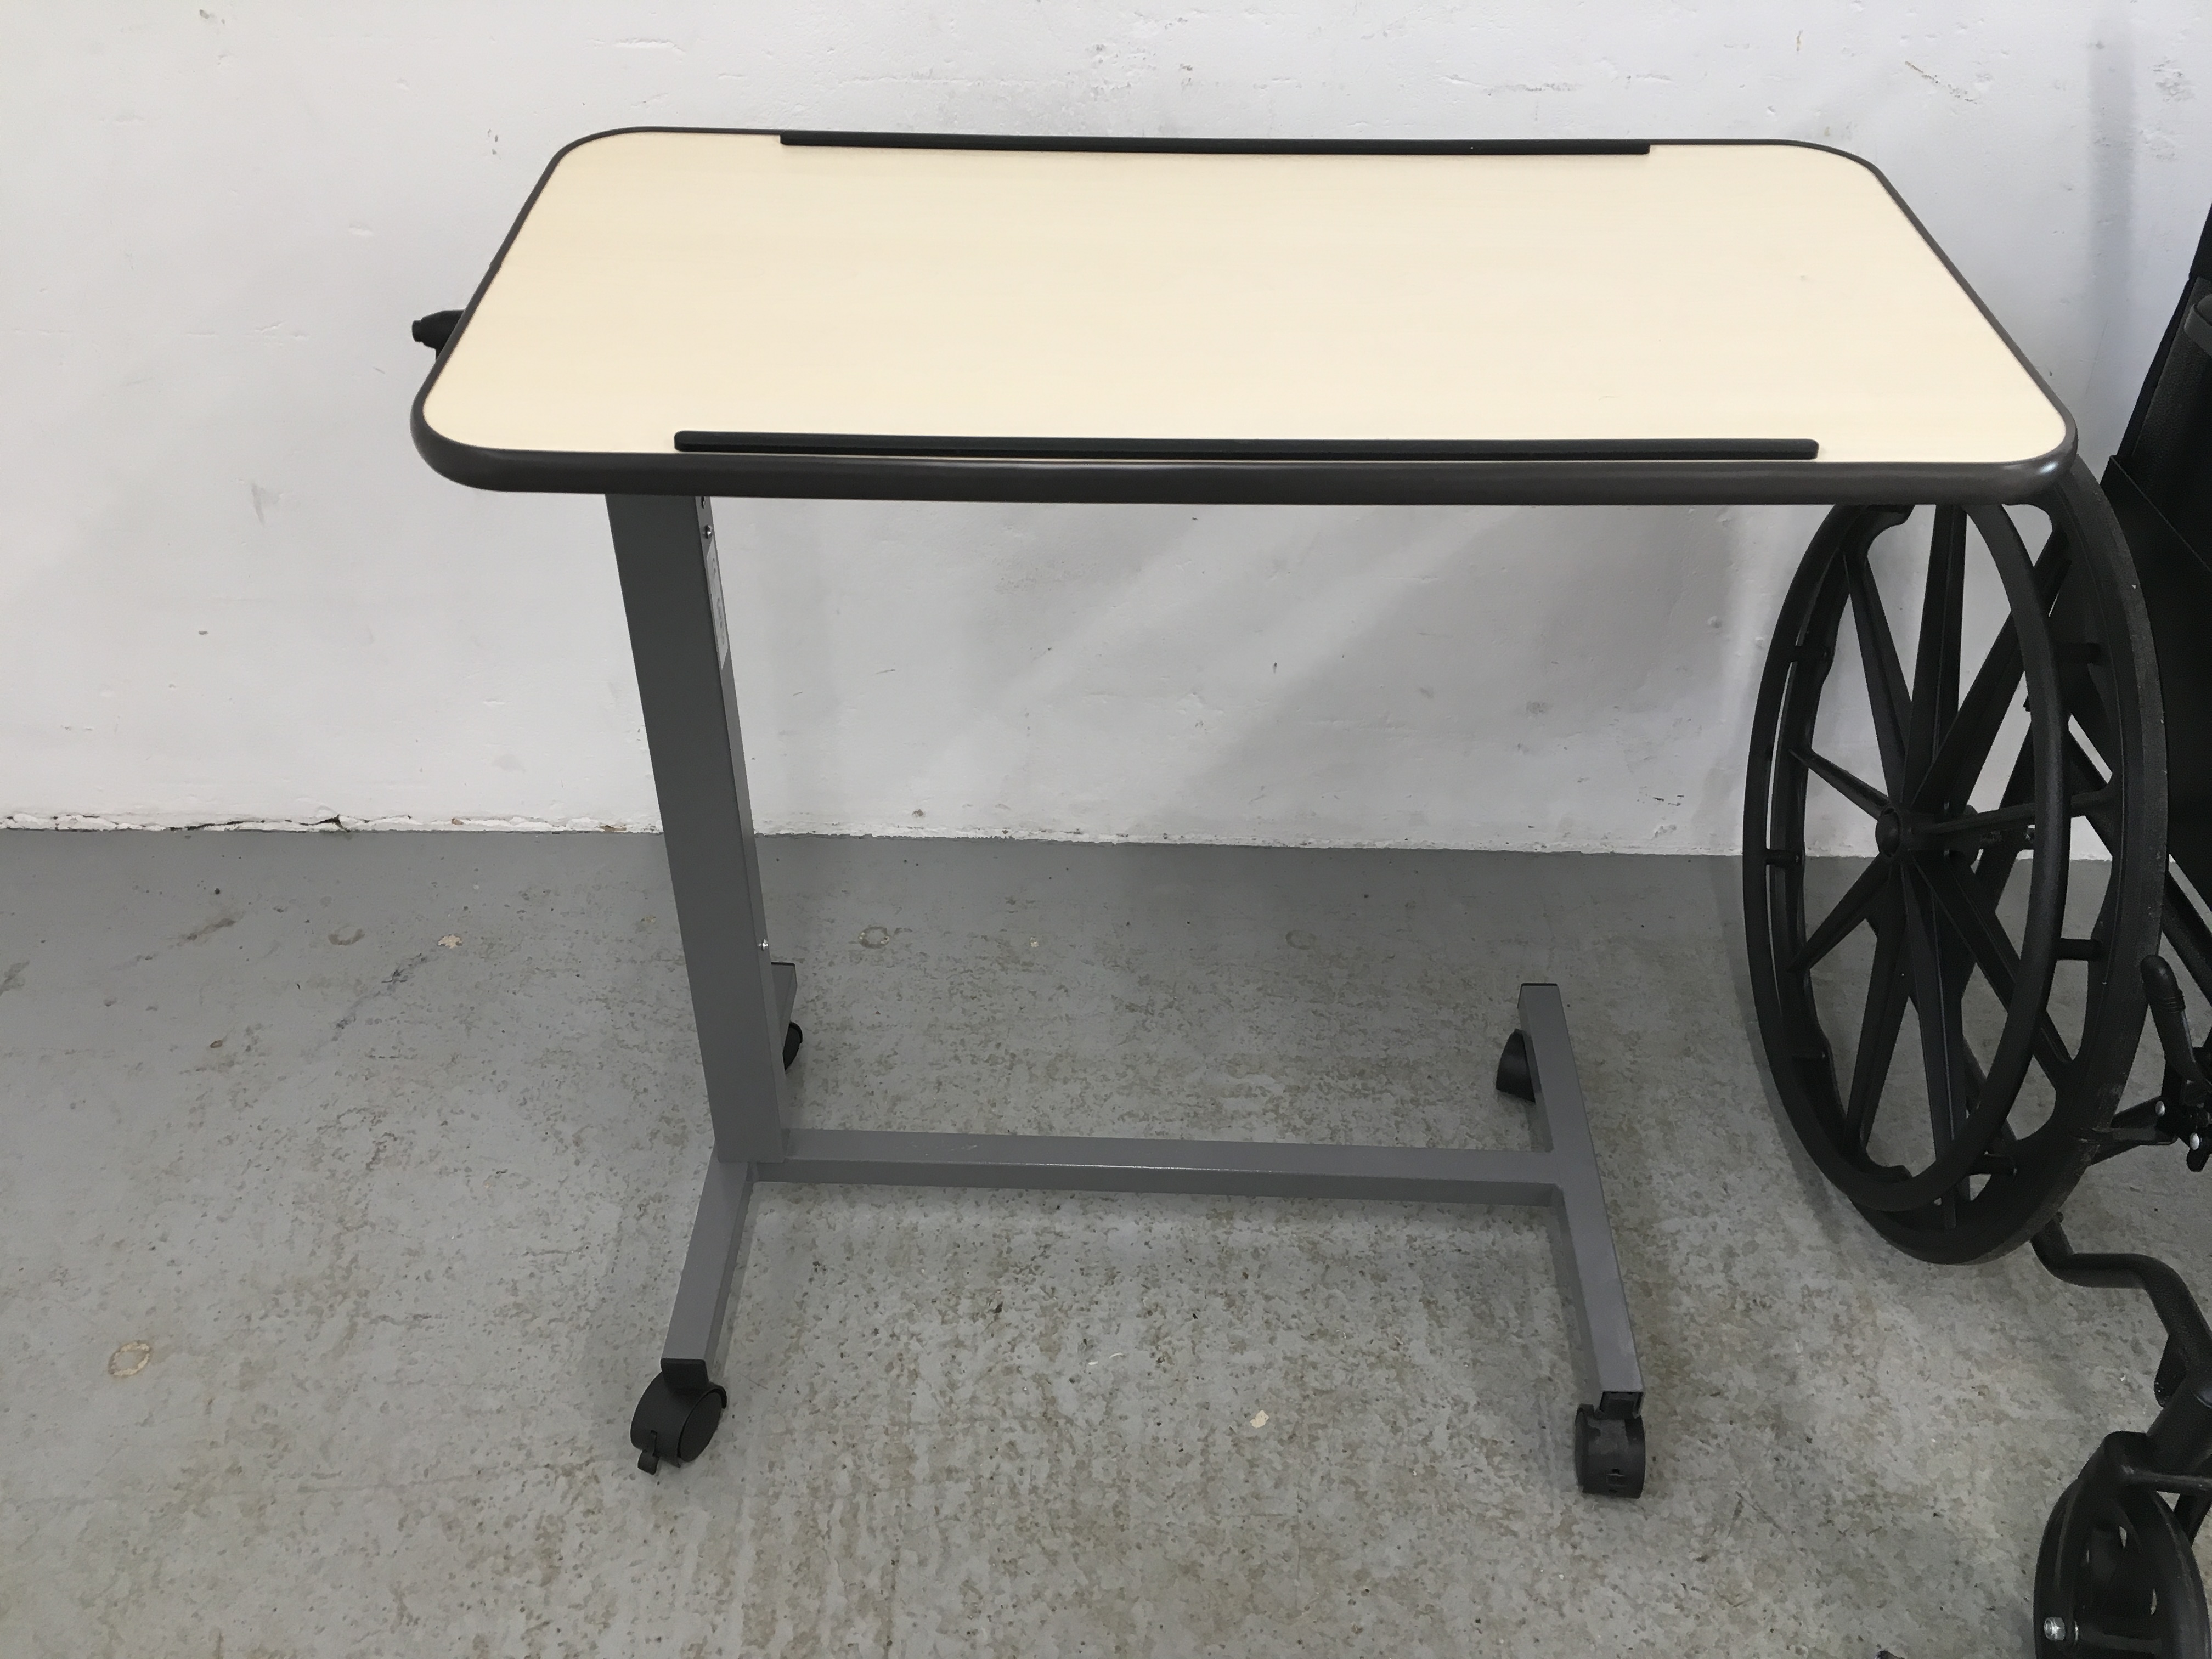 CARE CO WHEEL CHAIR AND FOOT RESTS ALONG WITH A WHEELED BED TRAY - Image 2 of 9